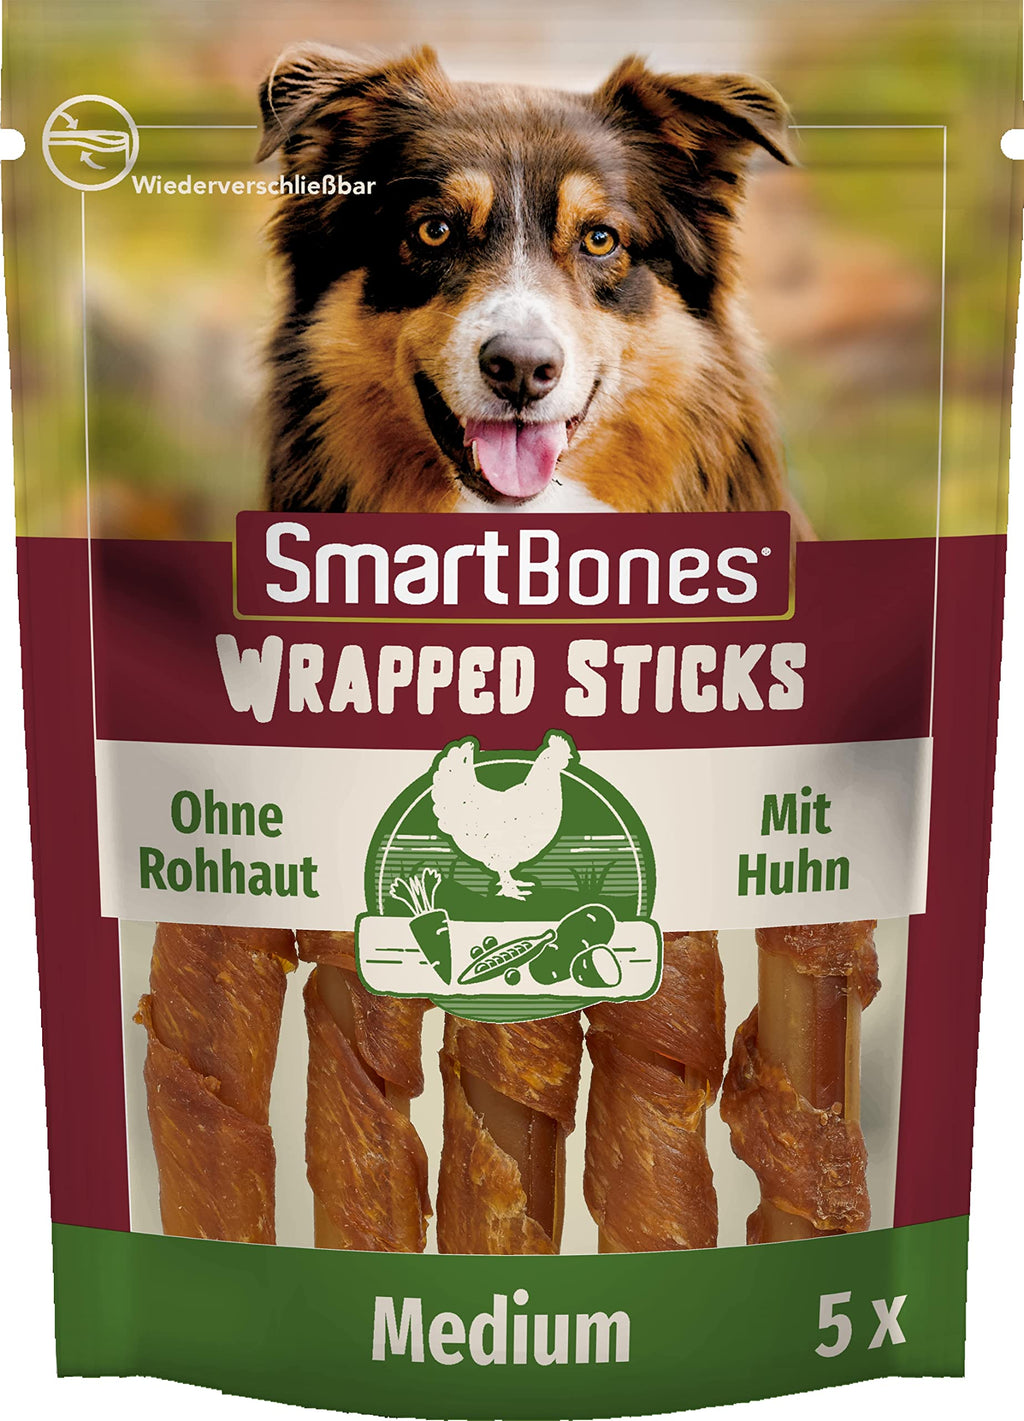 SmartBones Chicken Wrapped Sticks Medium - Dog Snack with Chicken for Medium Dogs, Chewing Sticks with Soft Texture, No Rawhide, Pack of 5 5 Pieces (Pack of 1) Wrapped Sticks Medium (Pack of 5) - PawsPlanet Australia